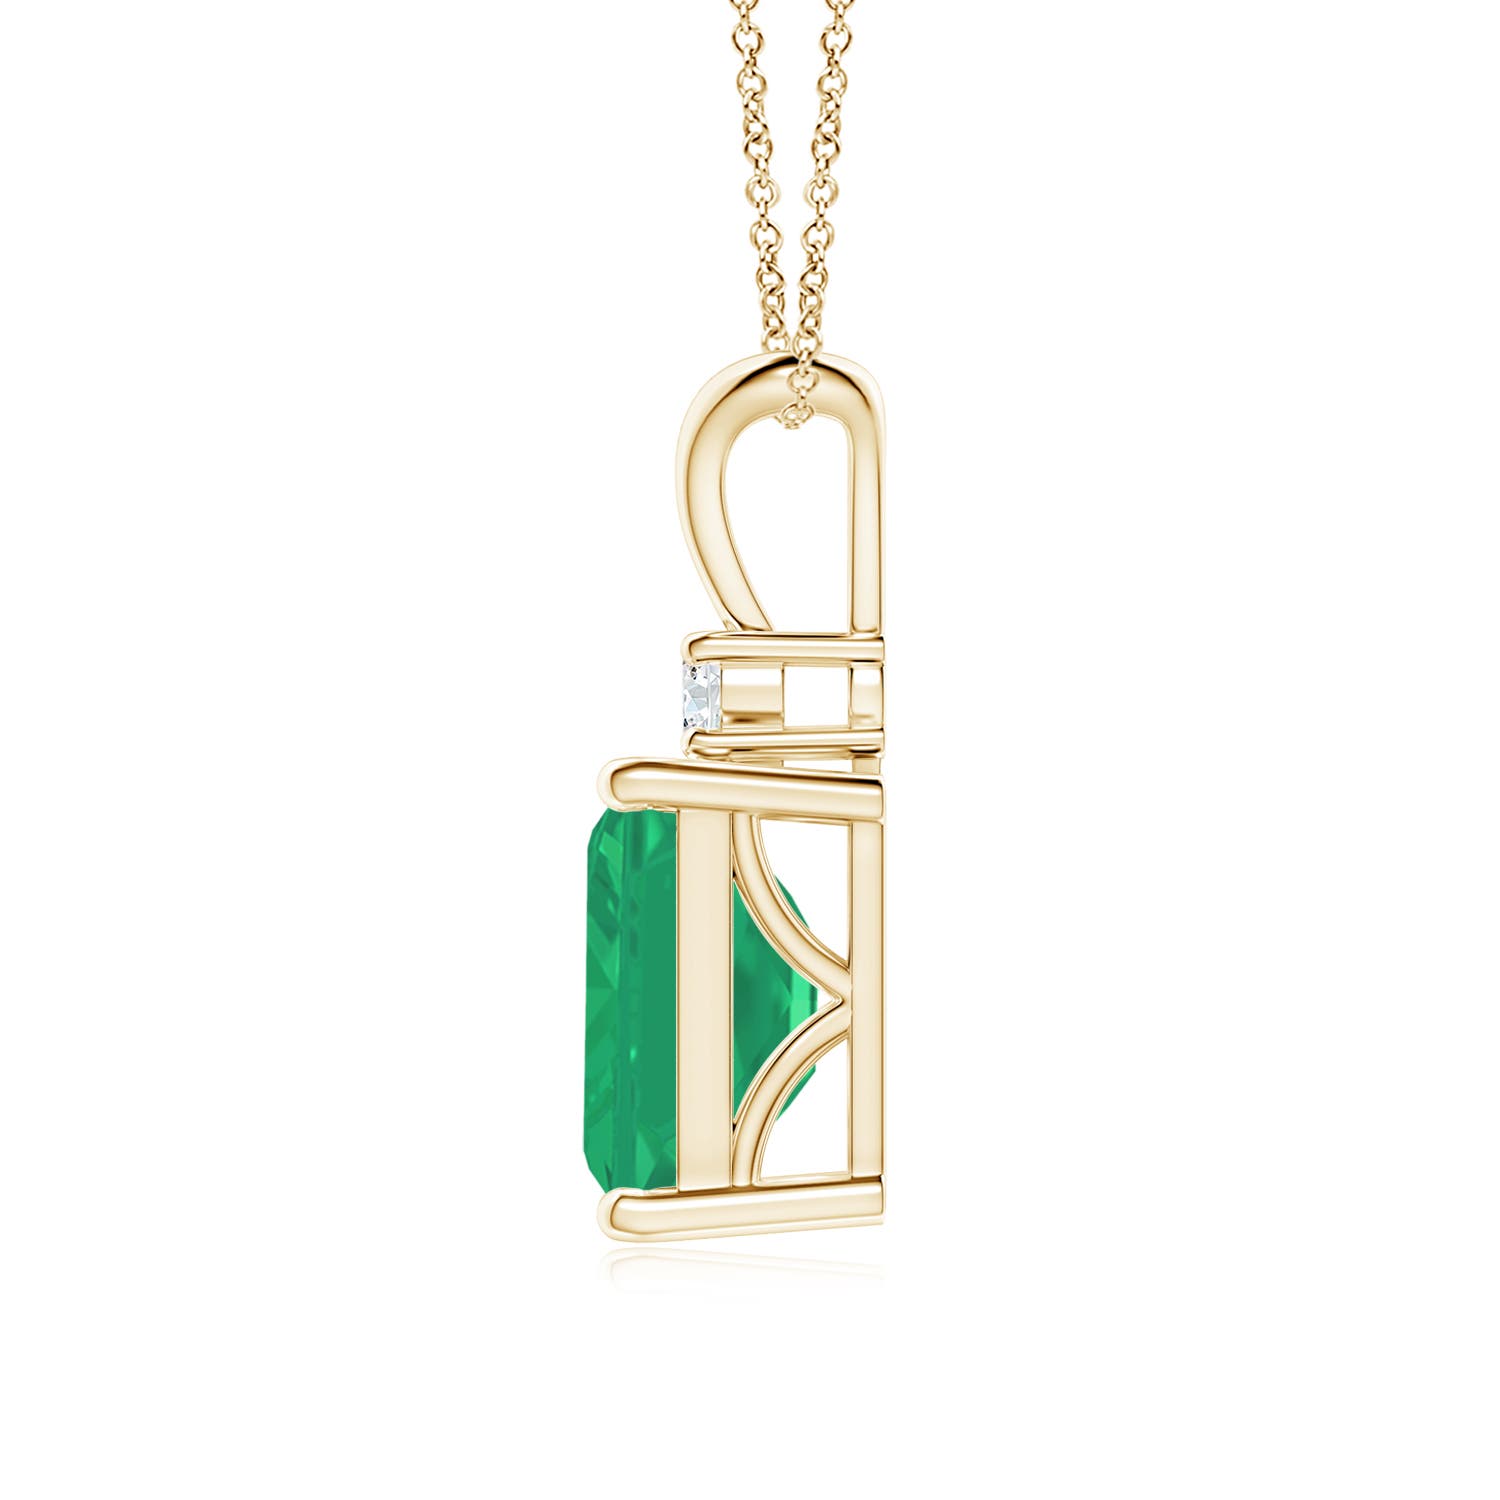 A - Emerald / 2.32 CT / 14 KT Yellow Gold